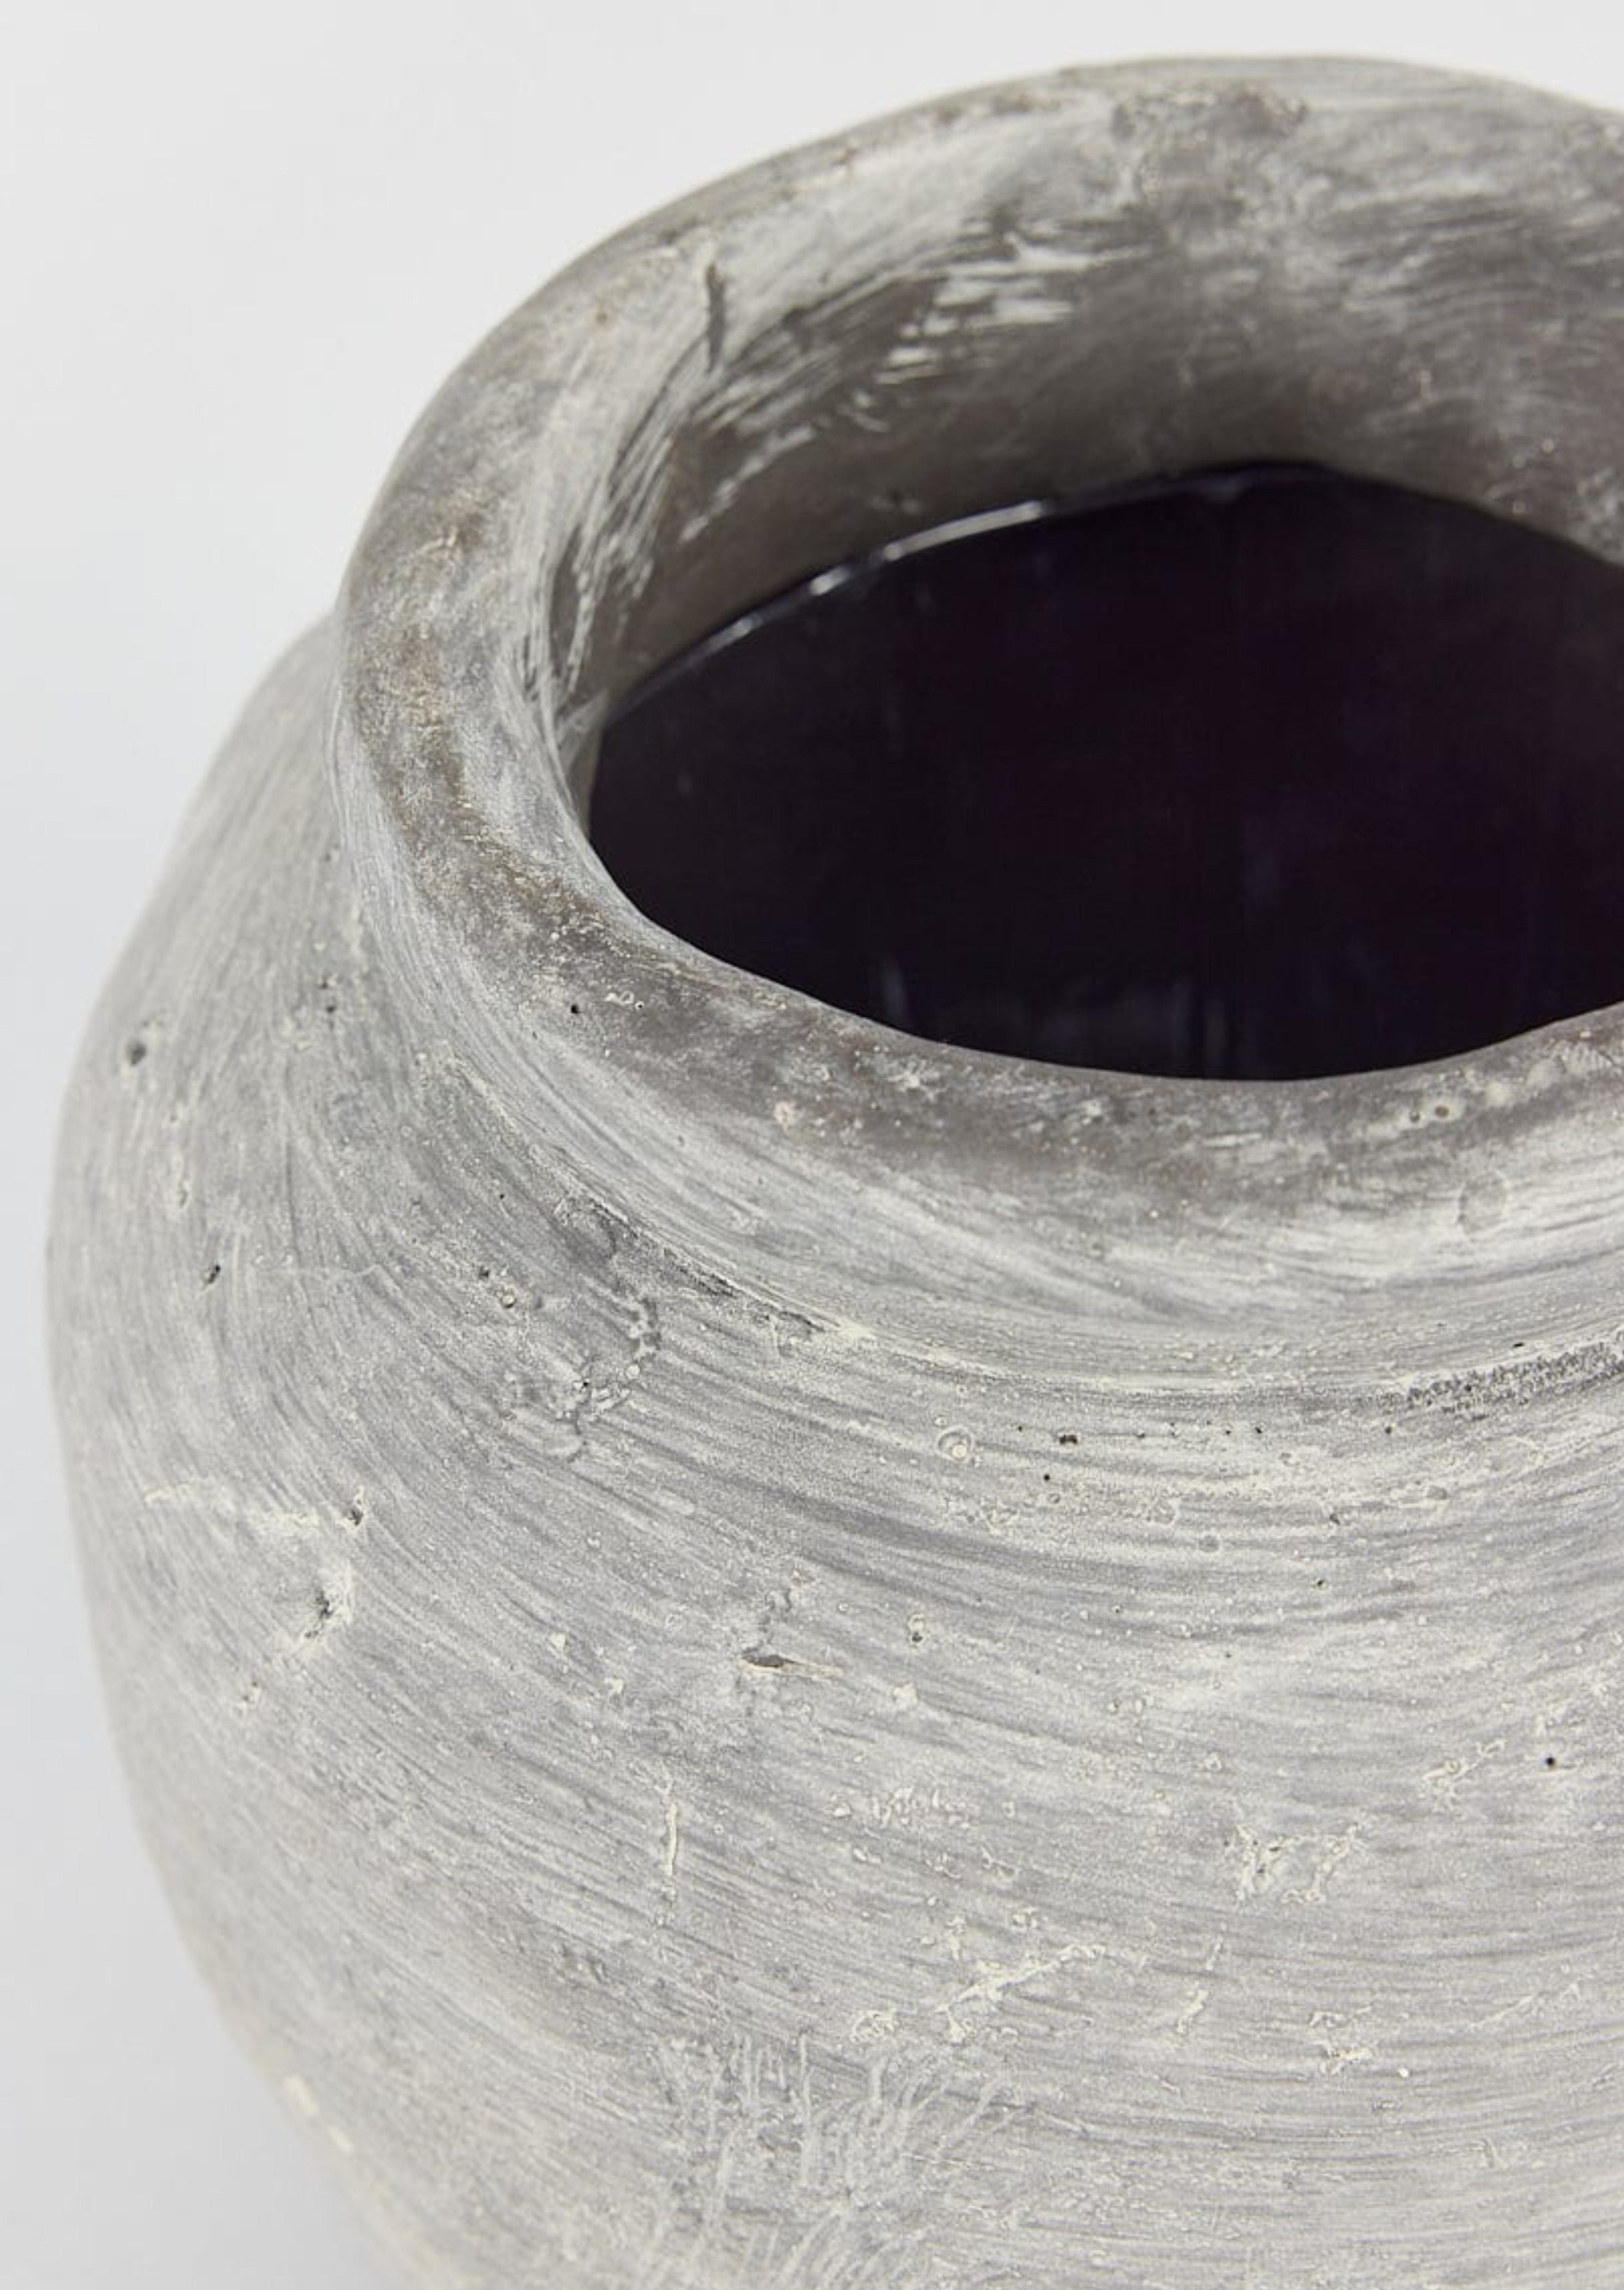 Afloral Close Up of Distressed Concrete Clay Vase